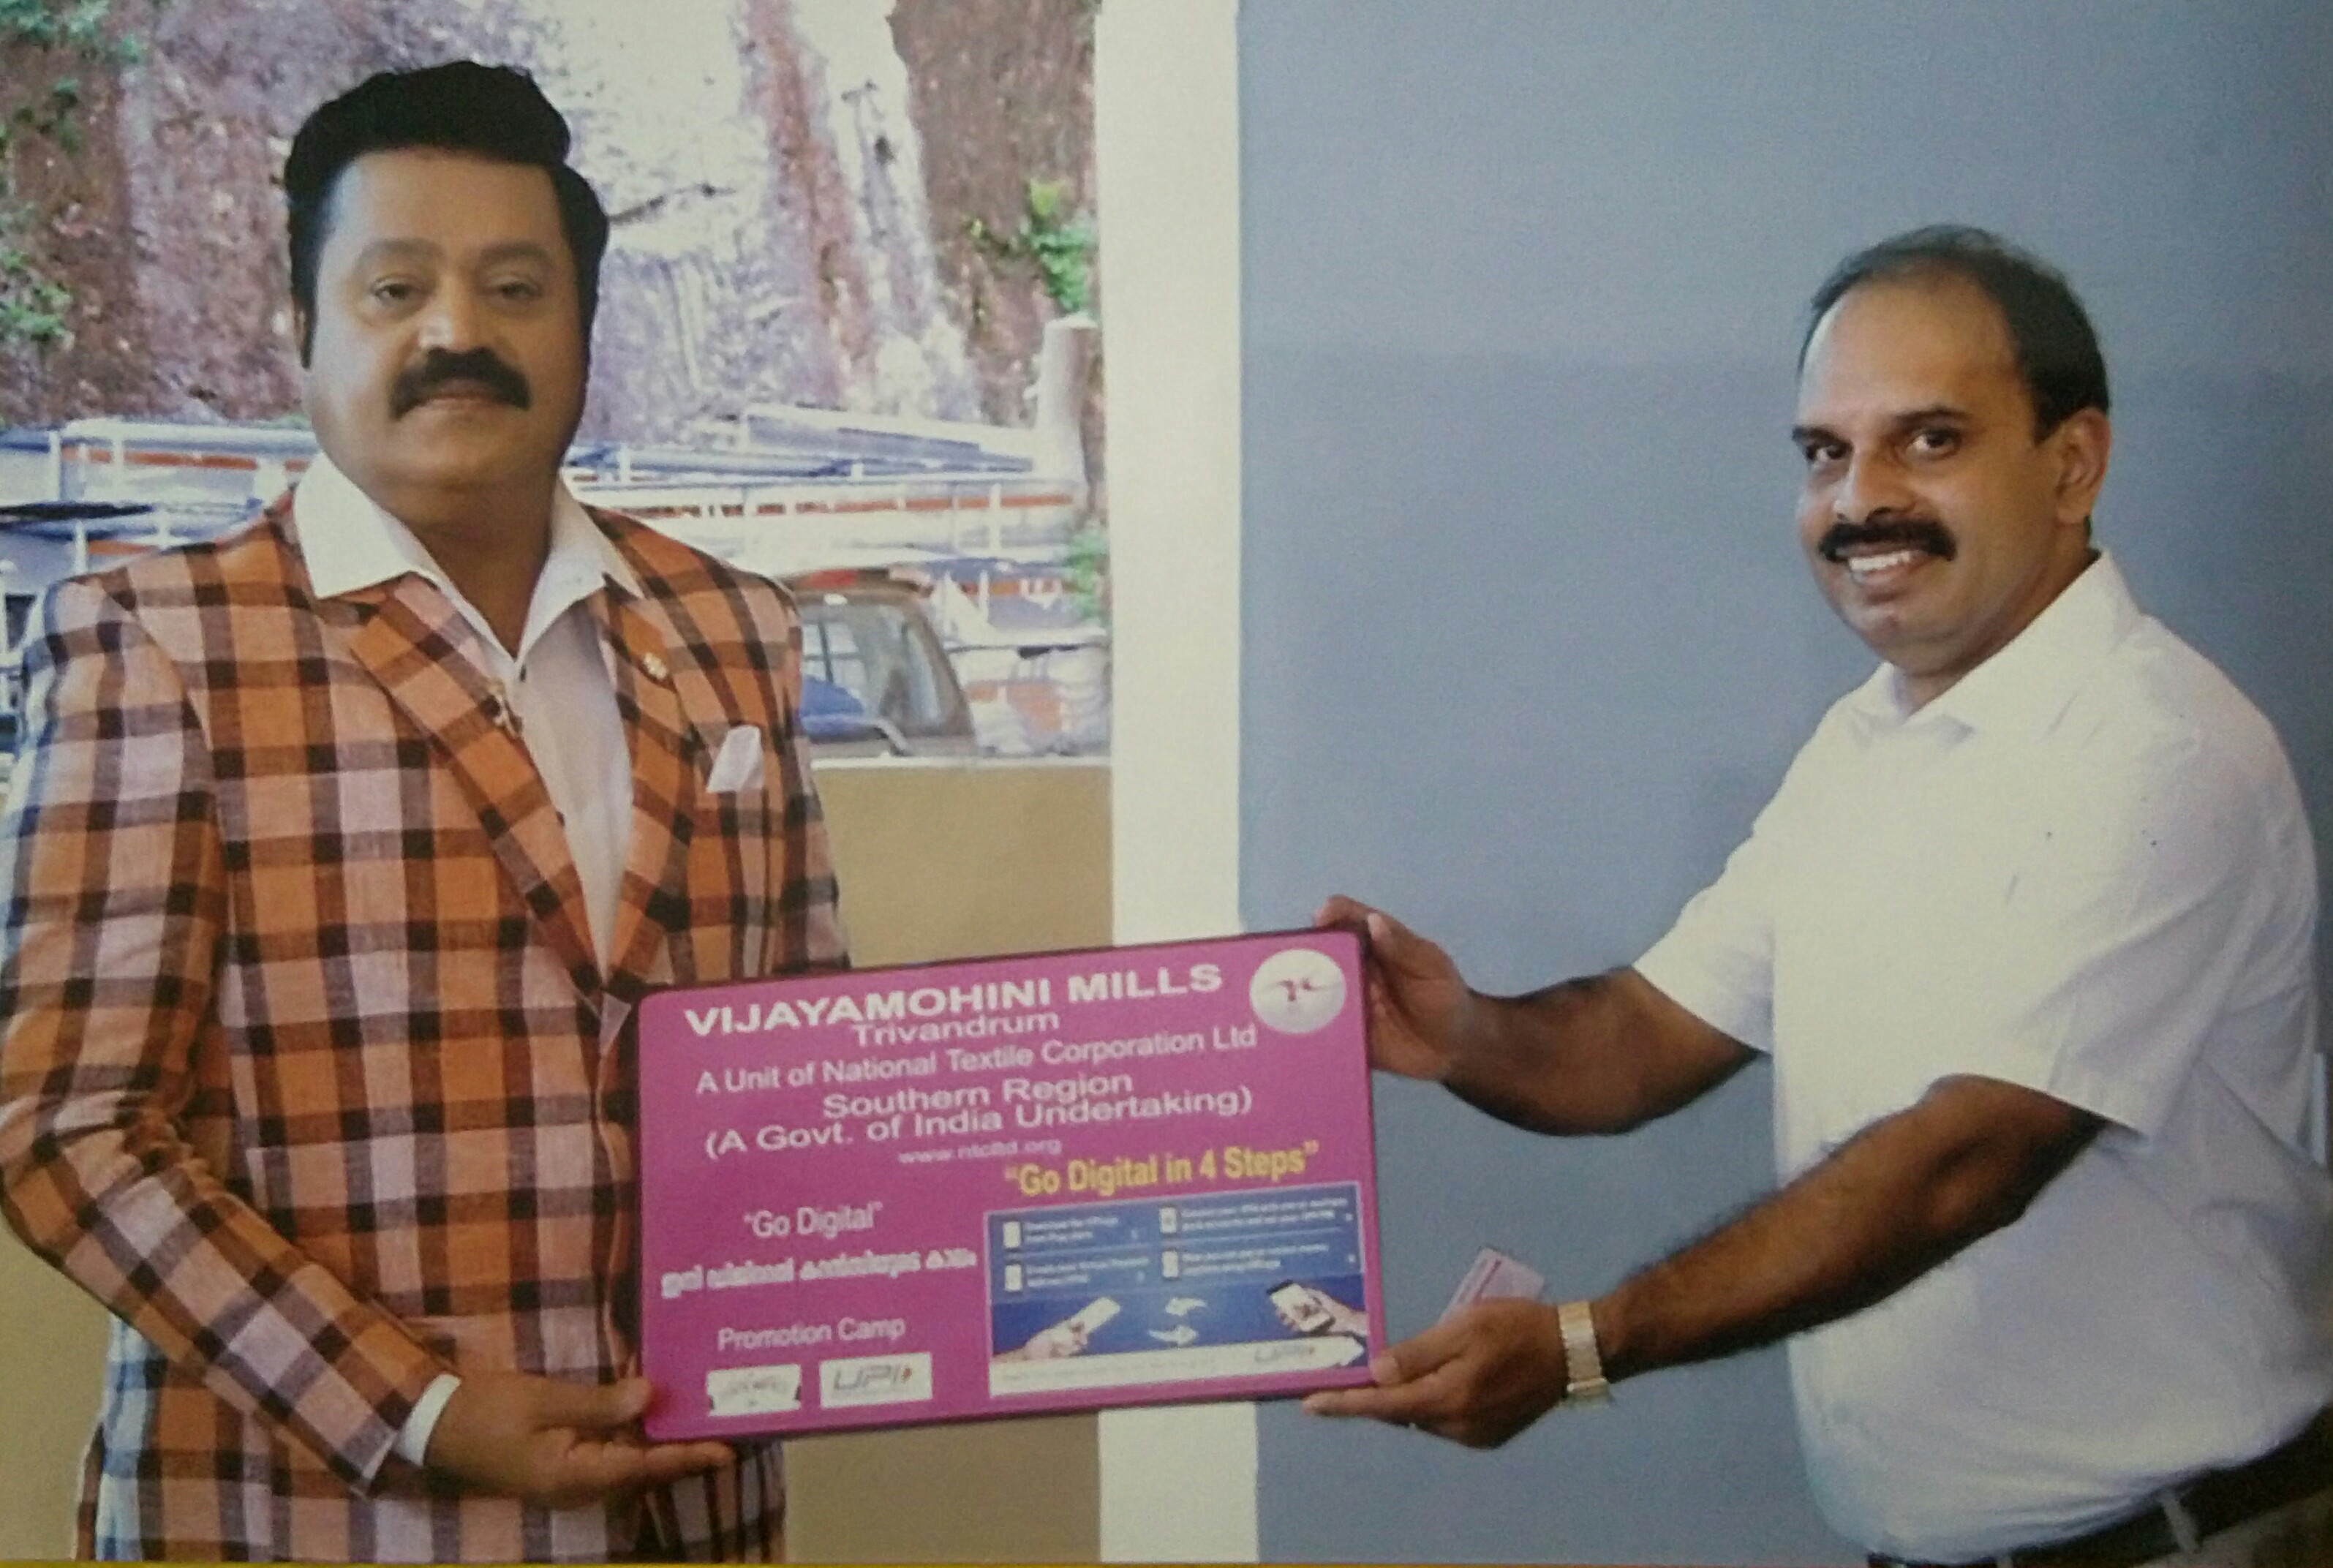  our Vijayamohini Mills – GM with Mr.Suresh Gopi, Member of Parliment and Cinema Actor